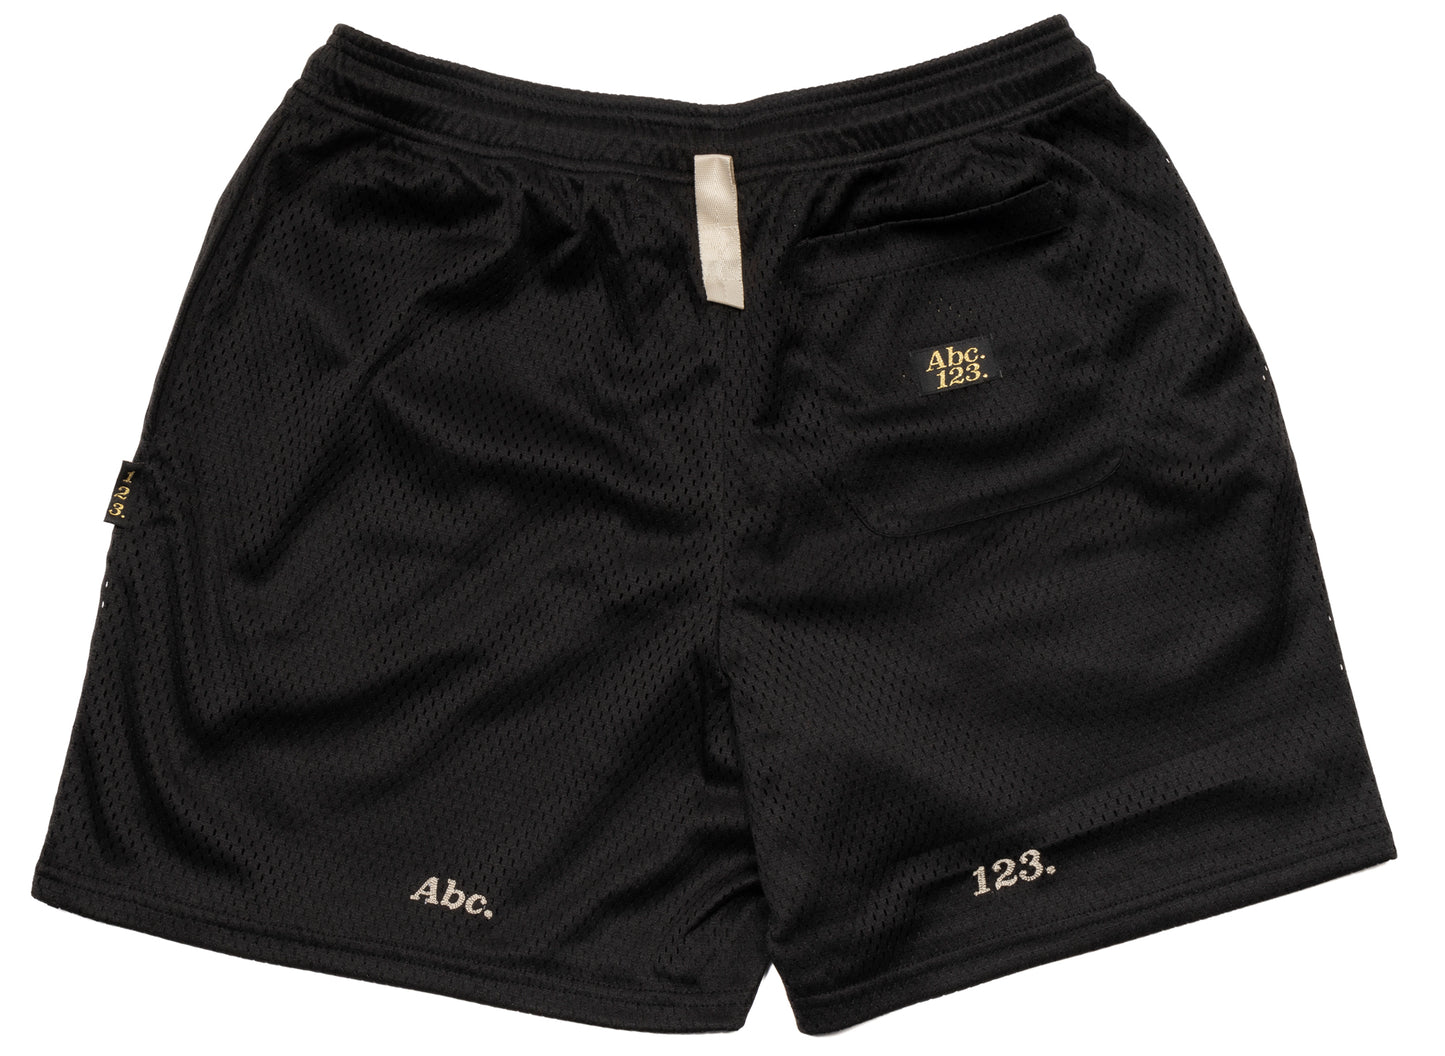 Advisory Board Crystals Abc. 123. Mesh Shorts in Anthracite